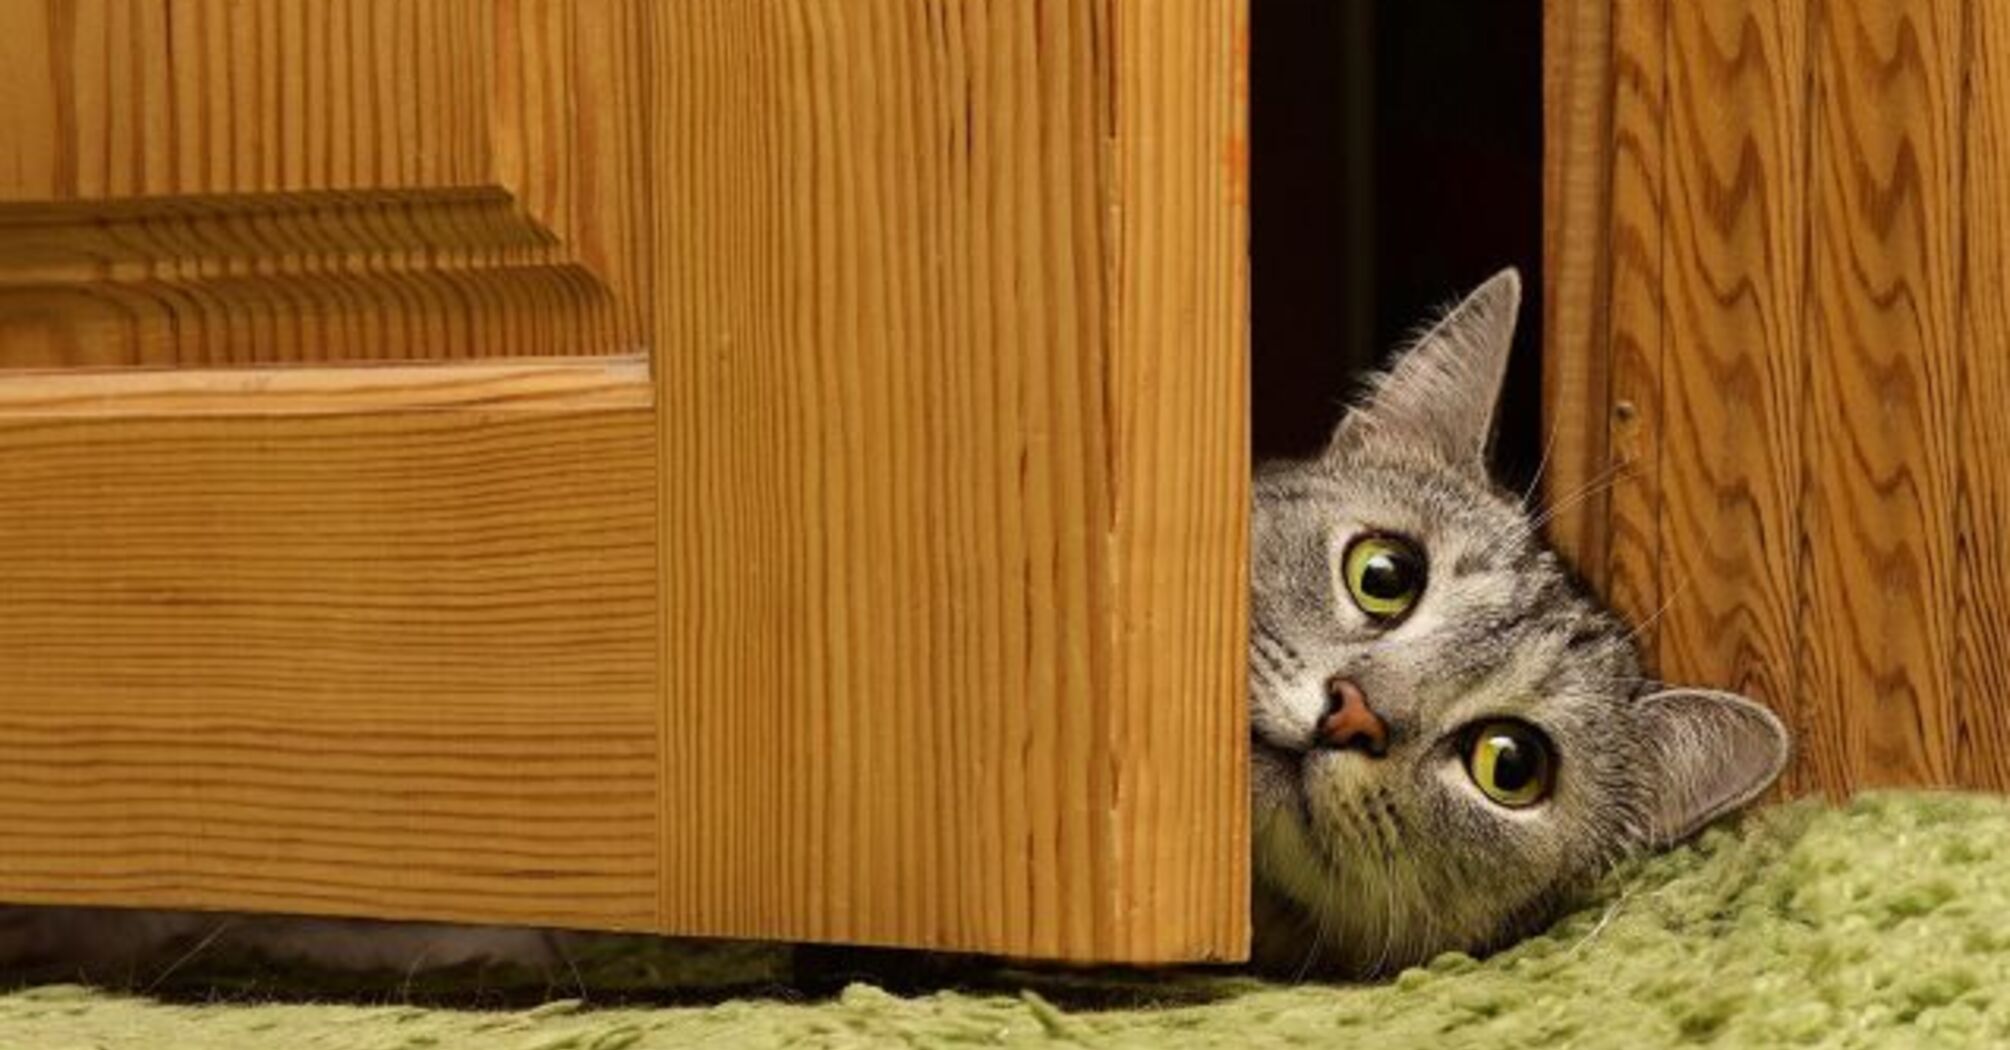 How to calm a cat screaming under the door